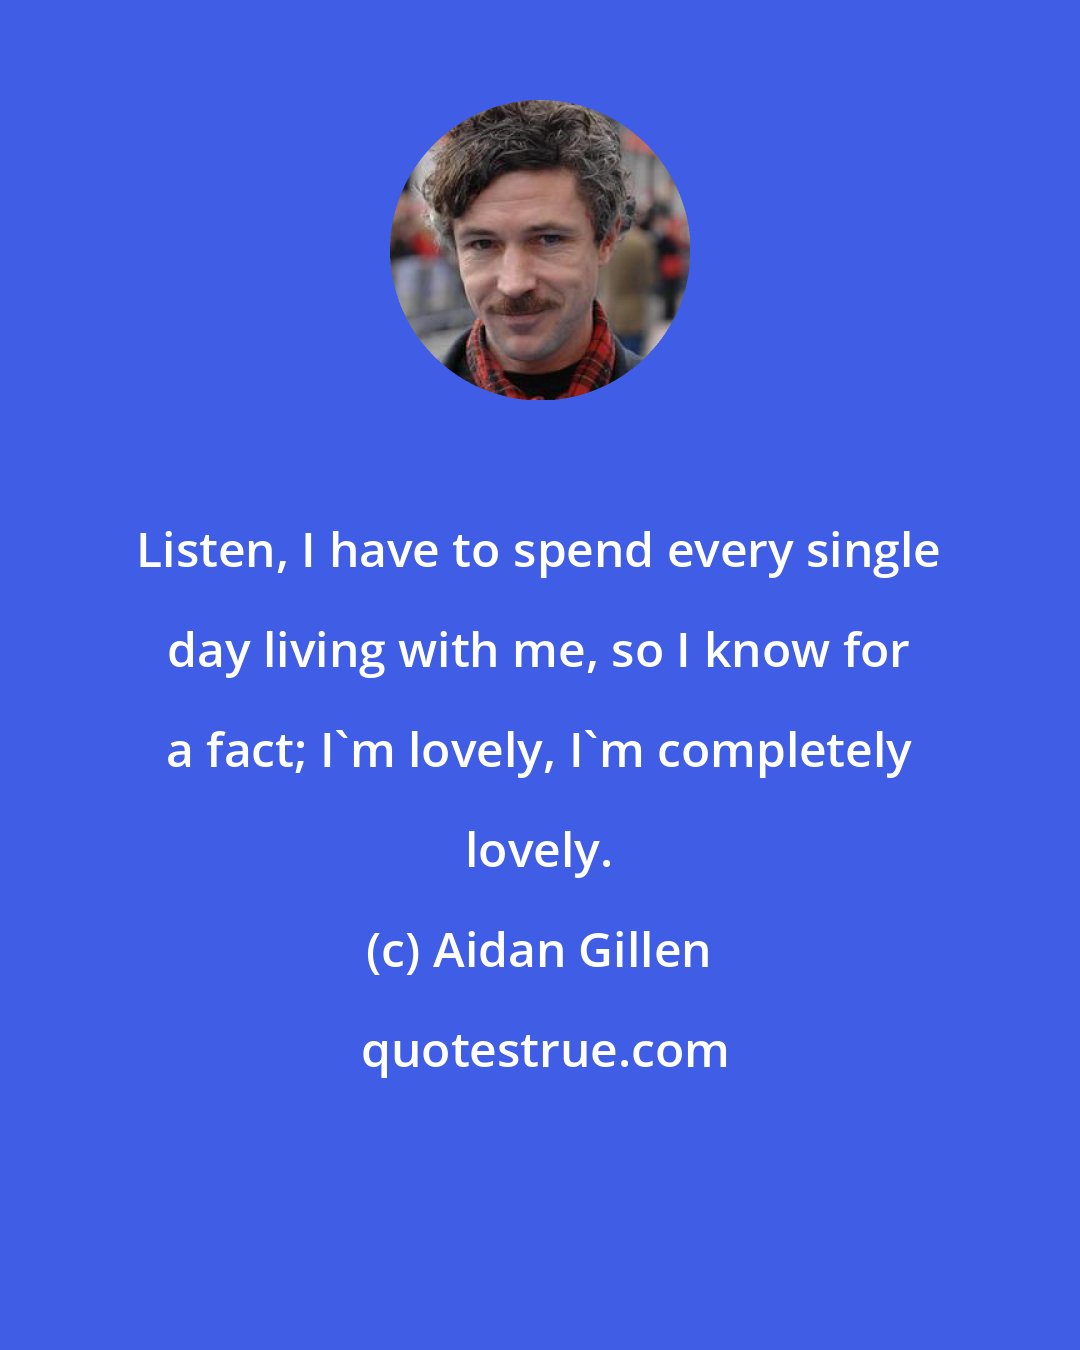 Aidan Gillen: Listen, I have to spend every single day living with me, so I know for a fact; I'm lovely, I'm completely lovely.